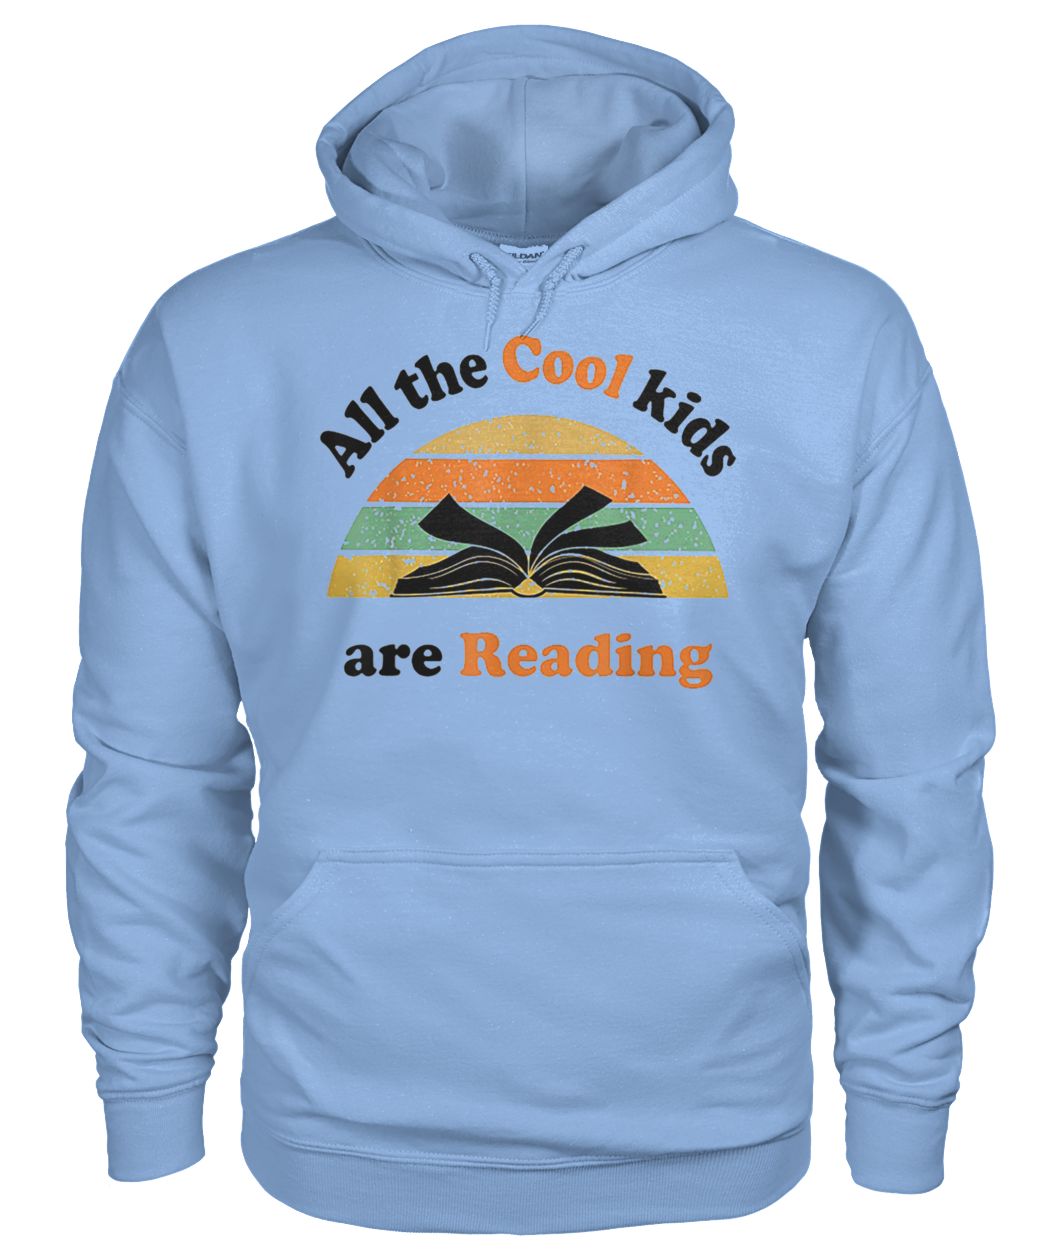 All the cool kids are reading vintage gildan hoodie